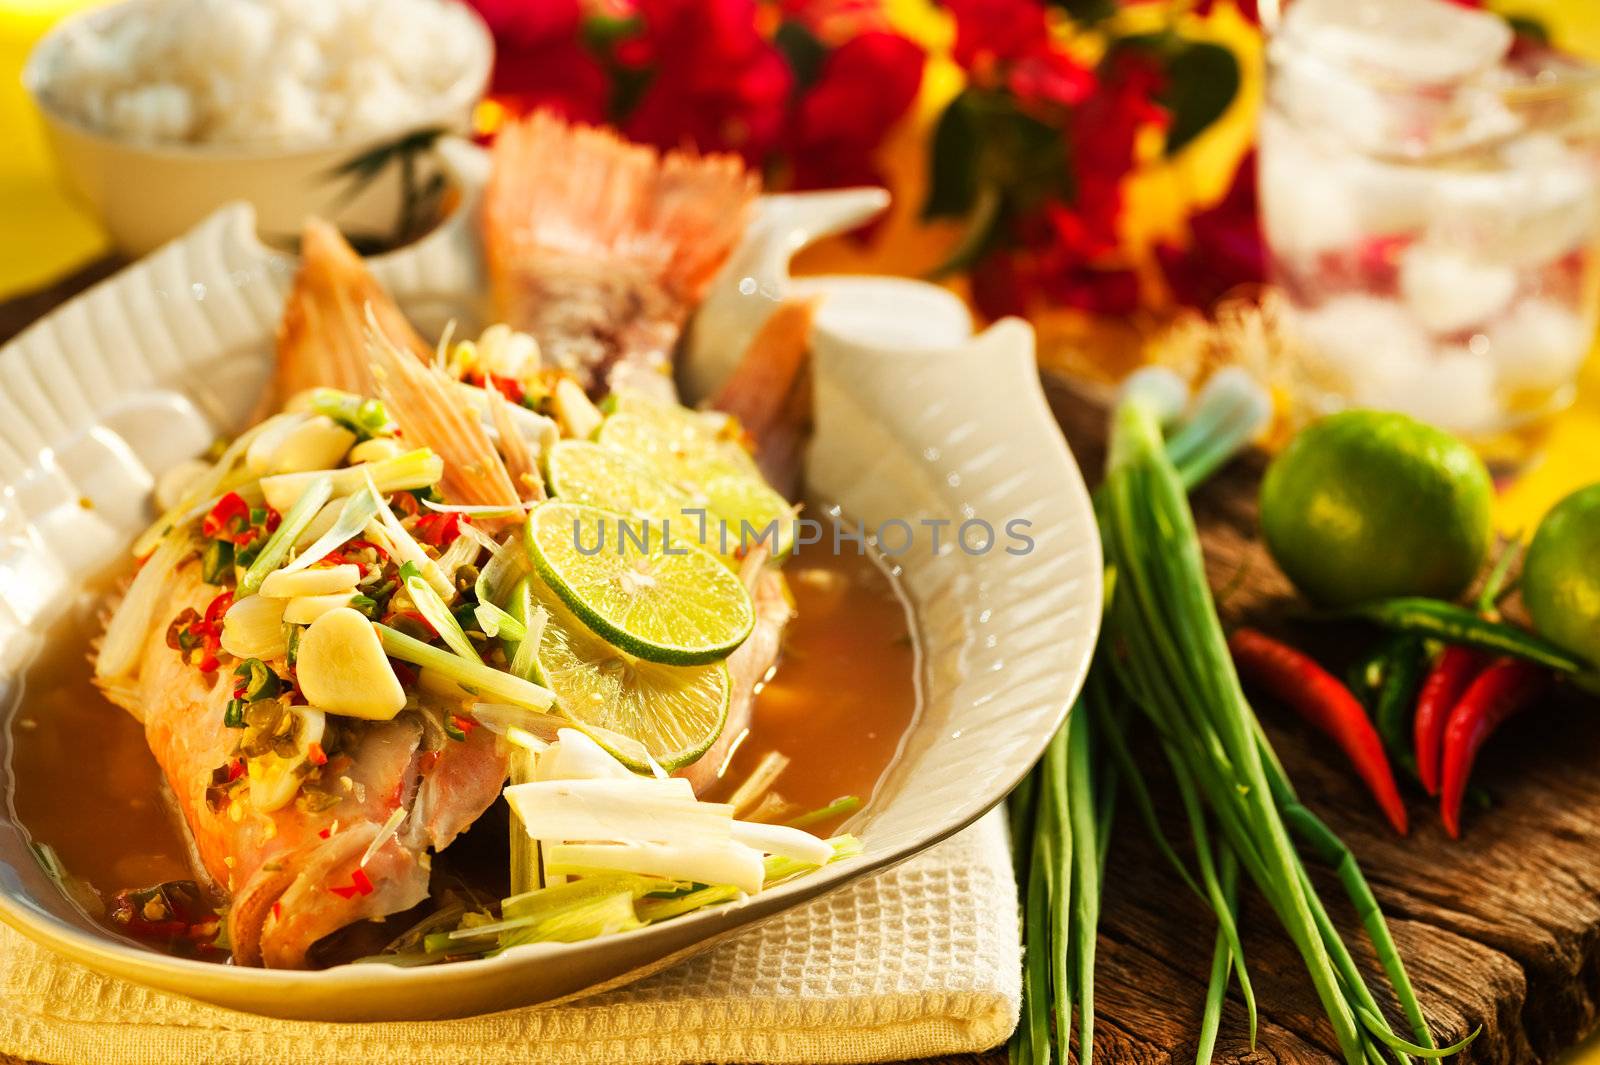 Thai food - Red snapper with garlic, chili, lemon grass and lemo by p.studio66